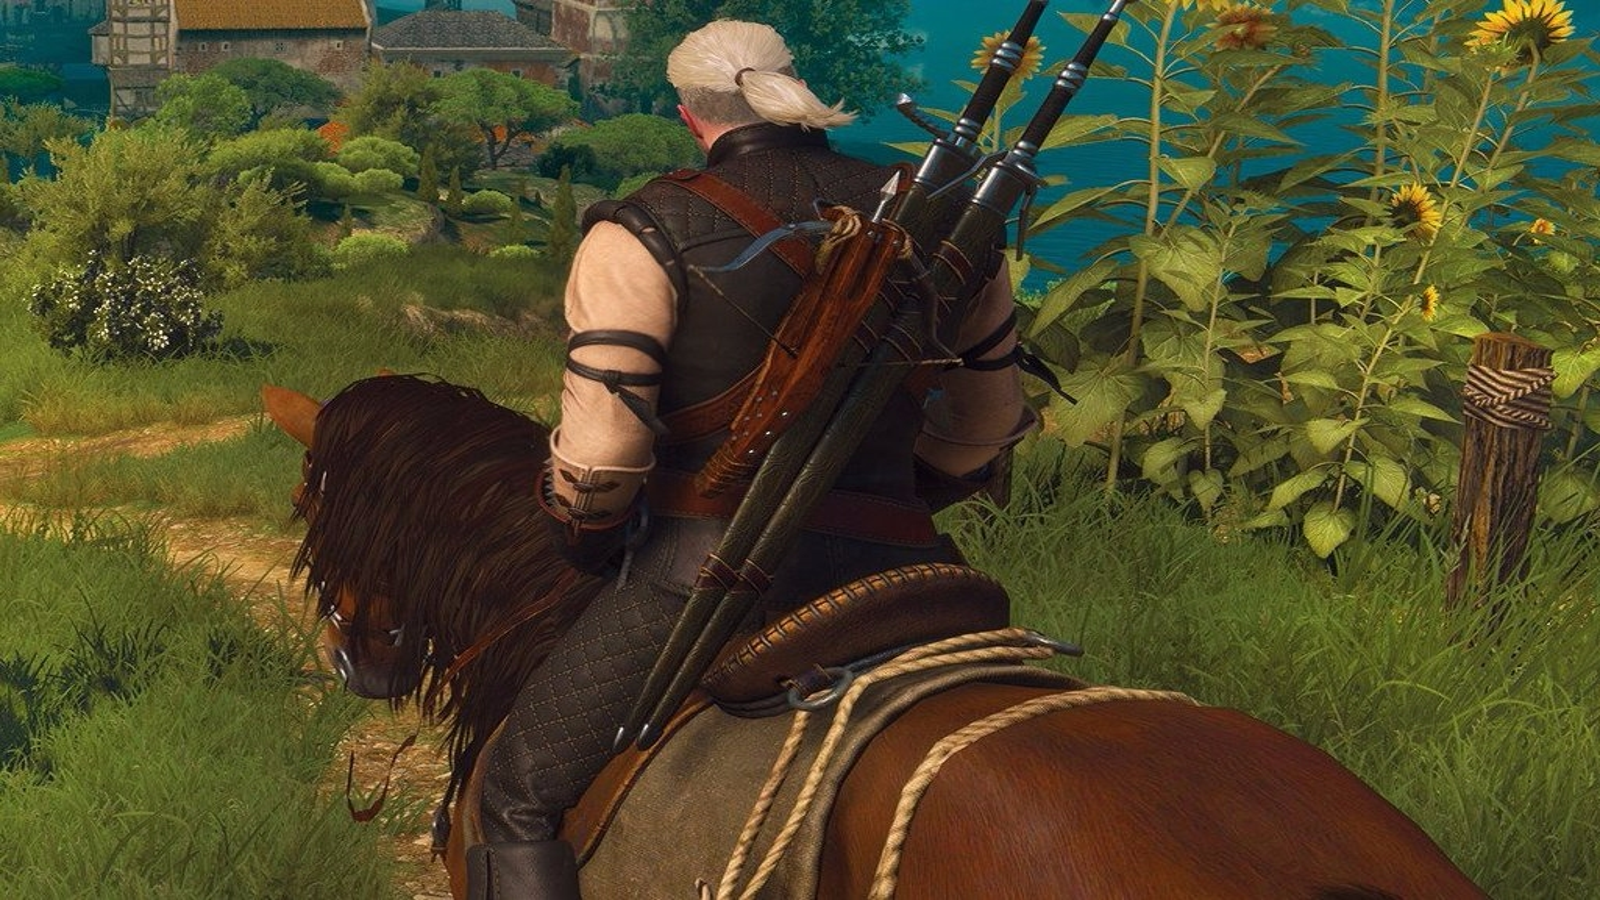 The Witcher 3: How To Obtain The Black Unicorn Relic Sword